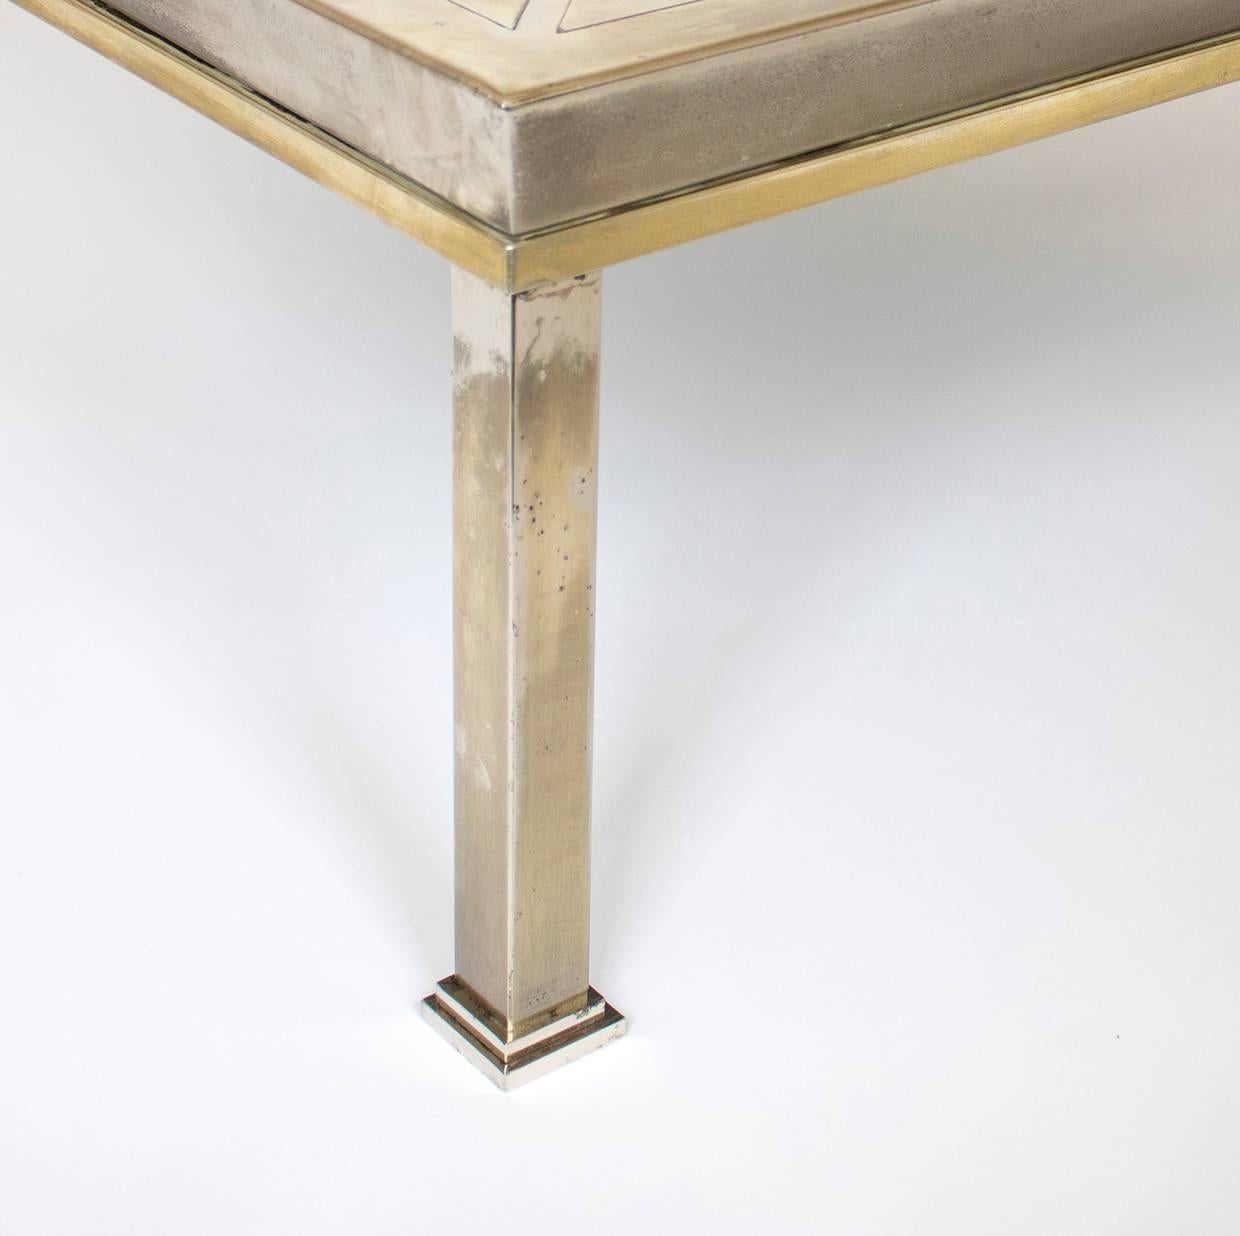 20th Century Mid-Century Modern Brushed Brass Coffee Table, Gabriella Crespi Geometric Style For Sale